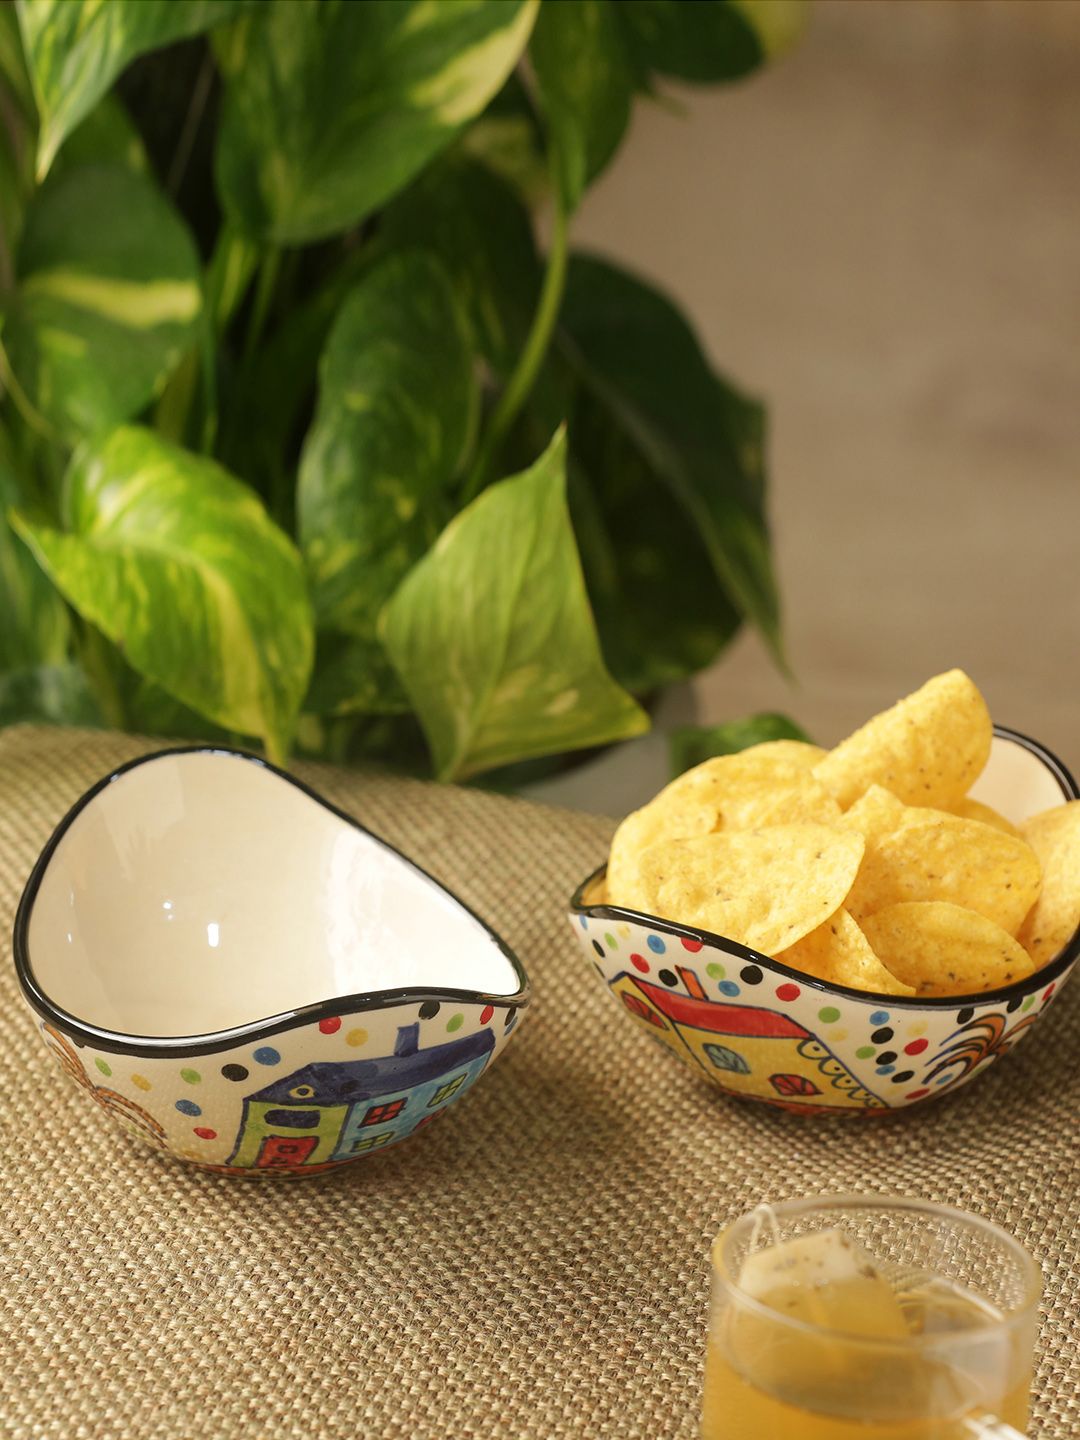 ExclusiveLane The Hut Curved Serving Hand-Painted Ceramic Serving Bowls (Set Of 2) Price in India